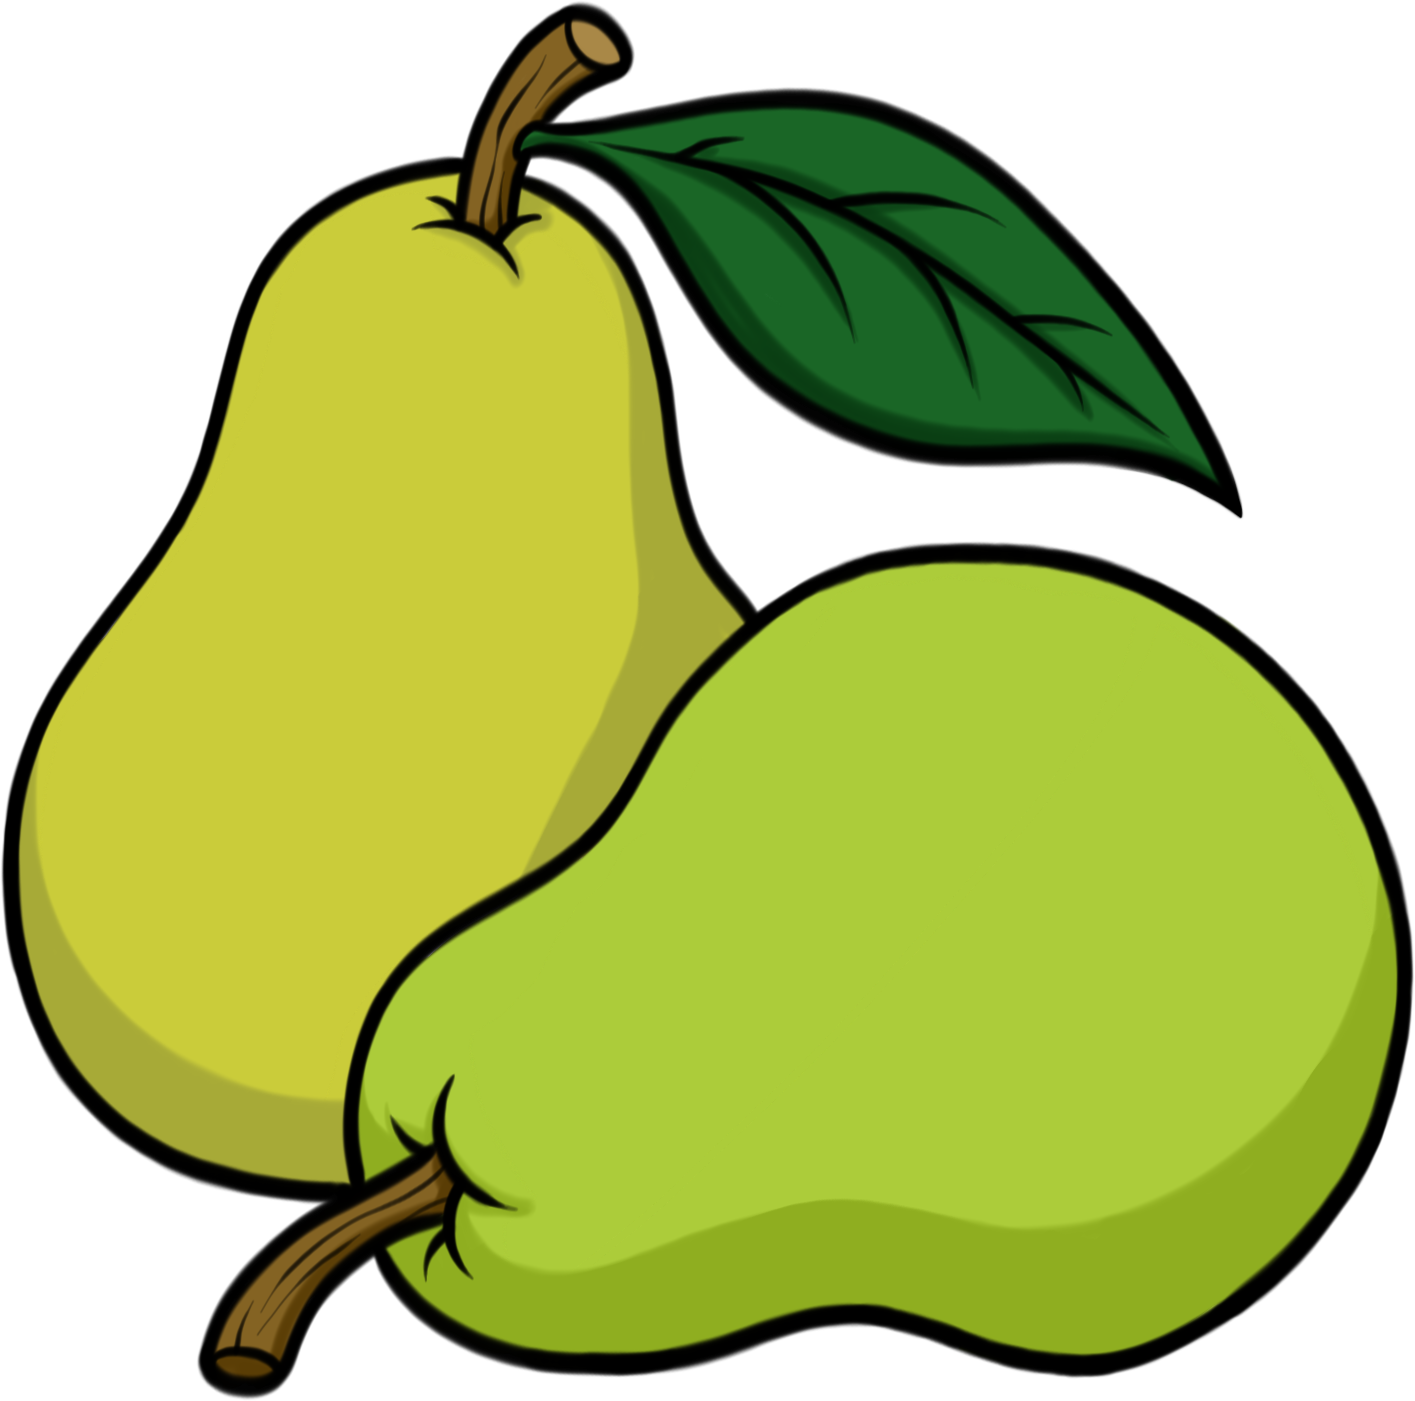 Pear like. Груши мультяшные. Груша рисунок. Груша мультяшная. Груша мультяшная без фона.